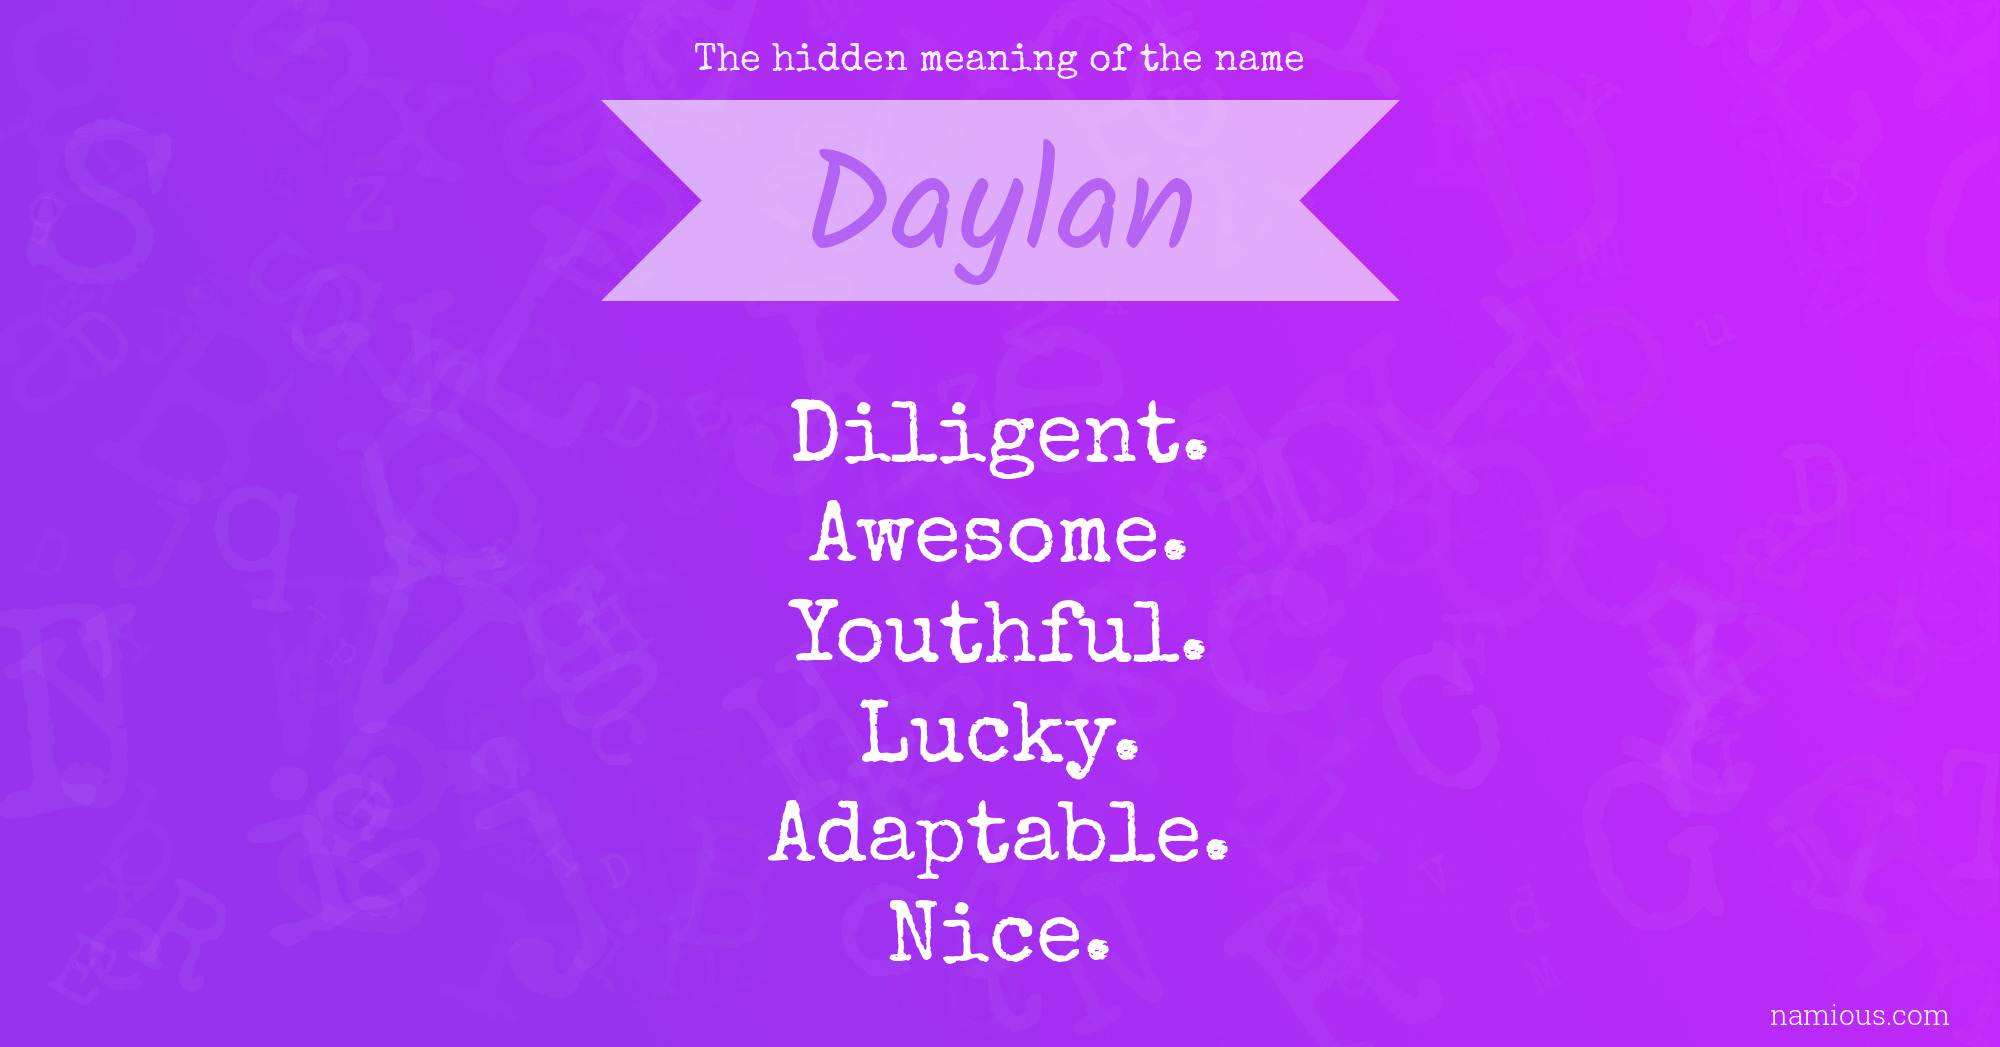 The hidden meaning of the name Daylan